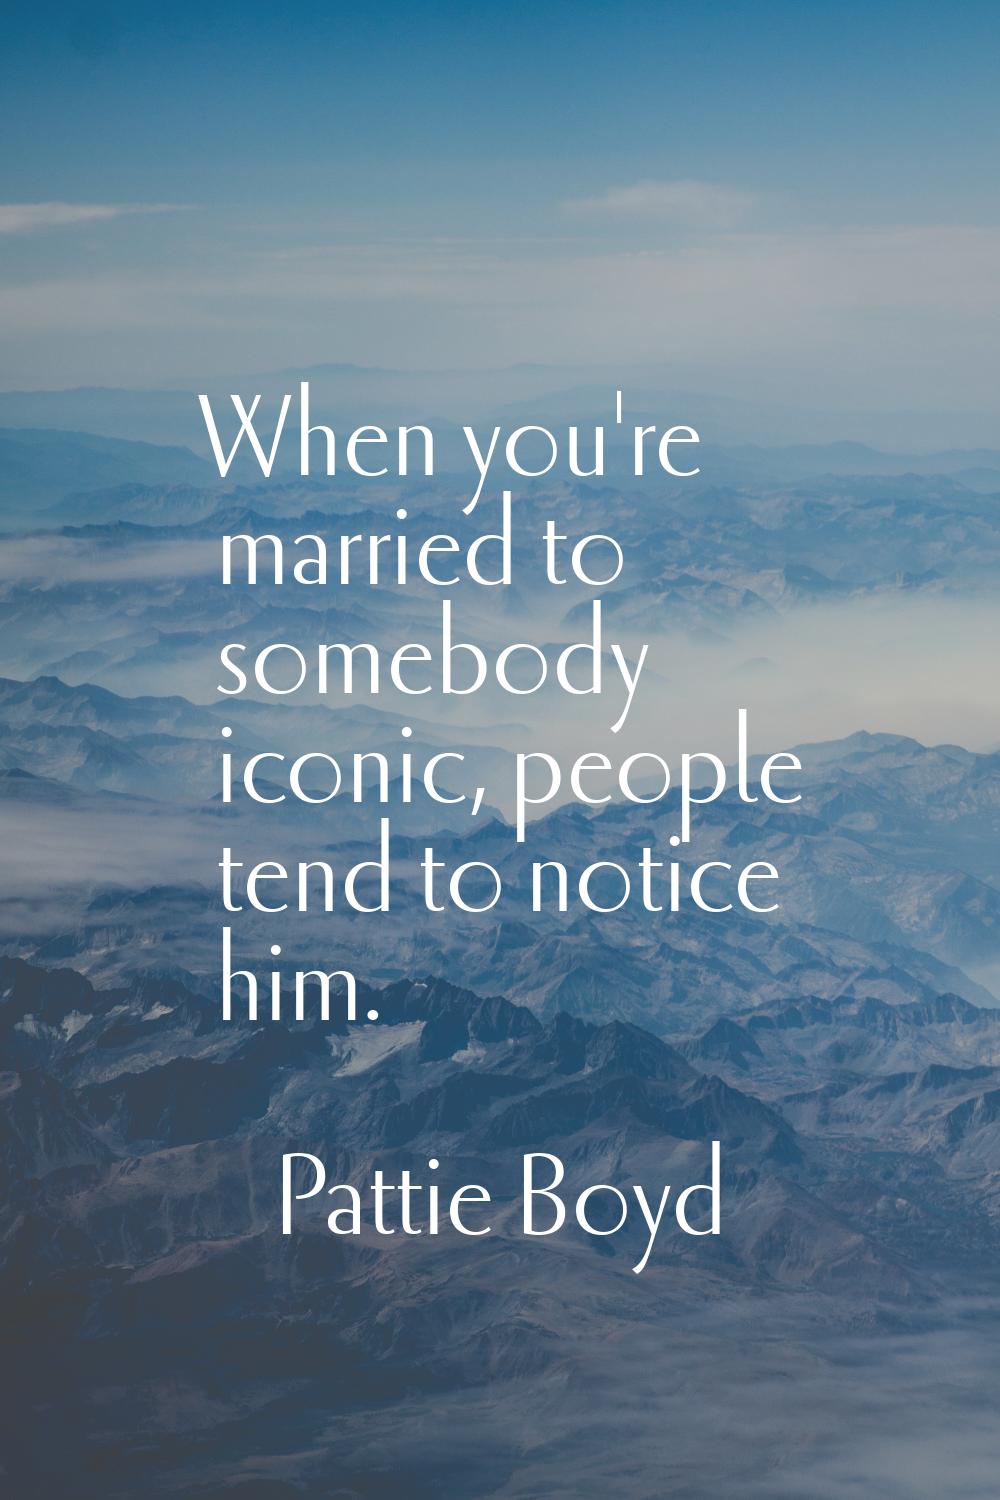 When you're married to somebody iconic, people tend to notice him.